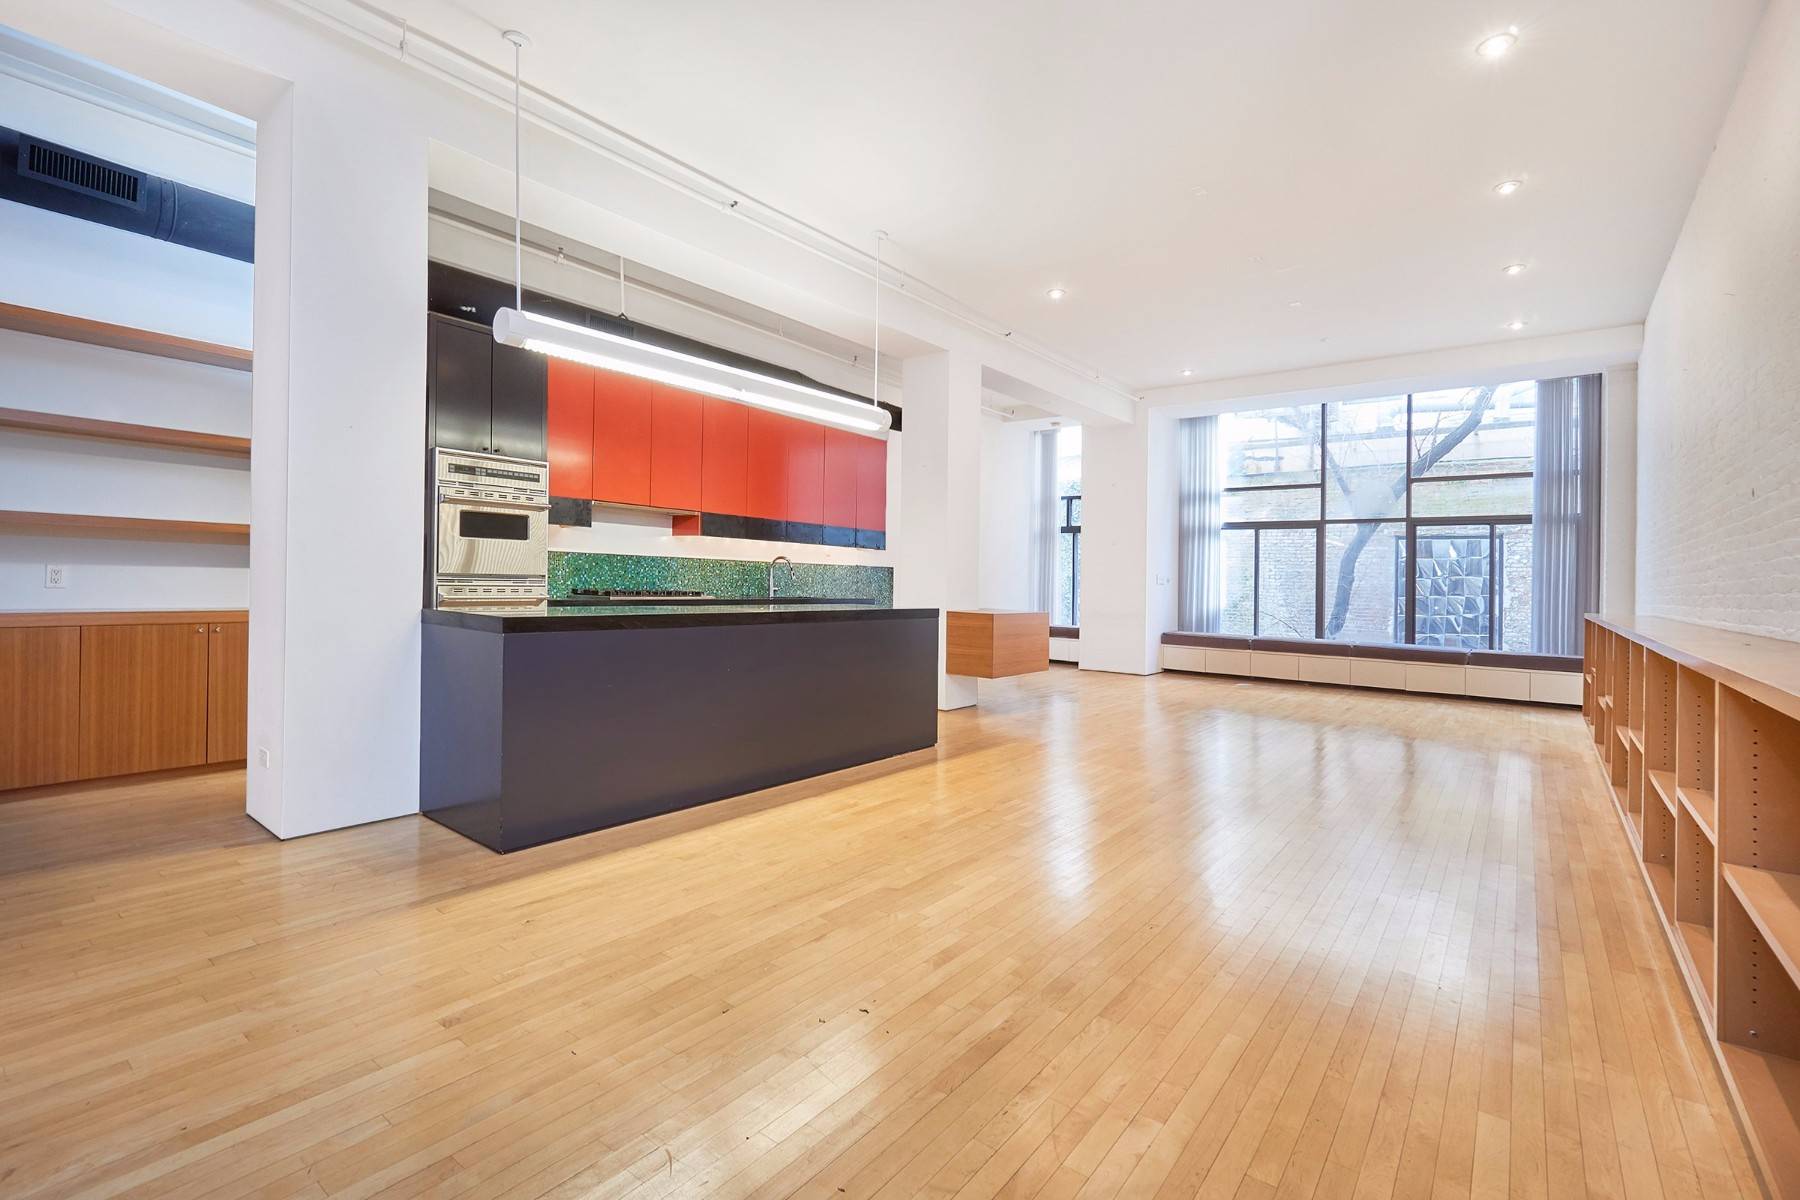 Duplex SoHo loft restorable 2 bedroom with private outdoor space brings a serene twist to a lively cosmopolitan neighborhood.